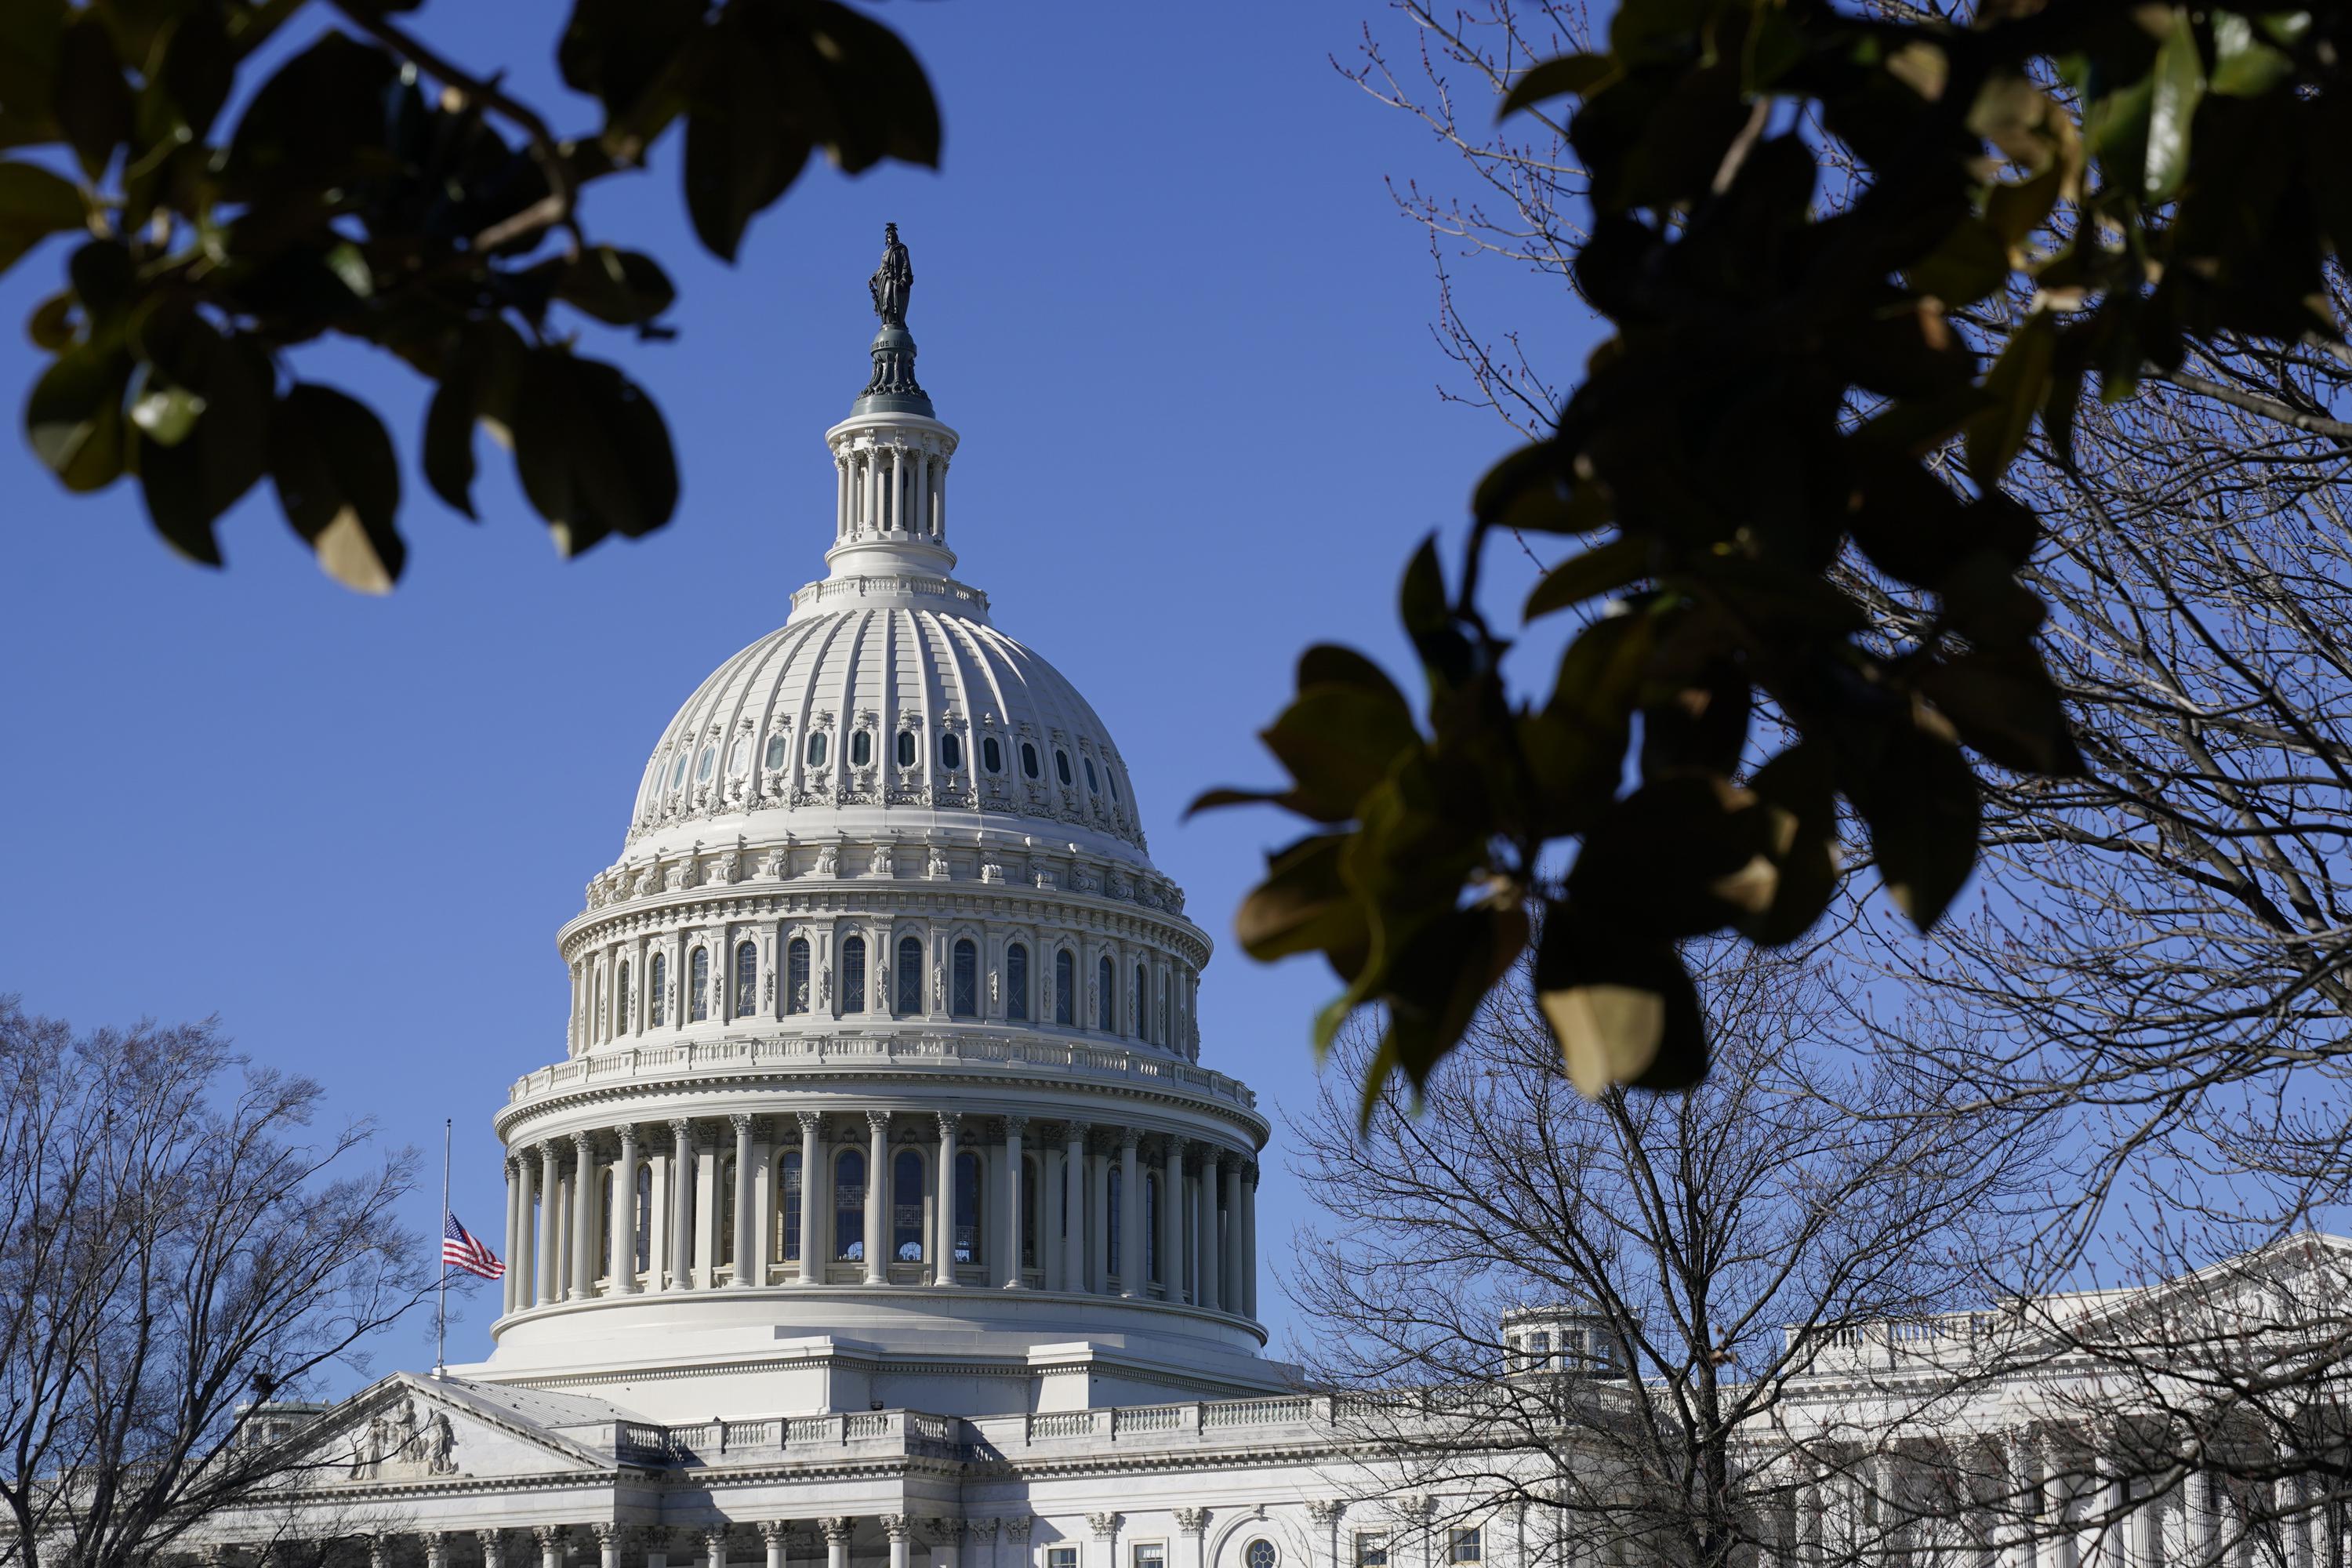 Congress members didn’t boost own salaries in March 2022 AP News